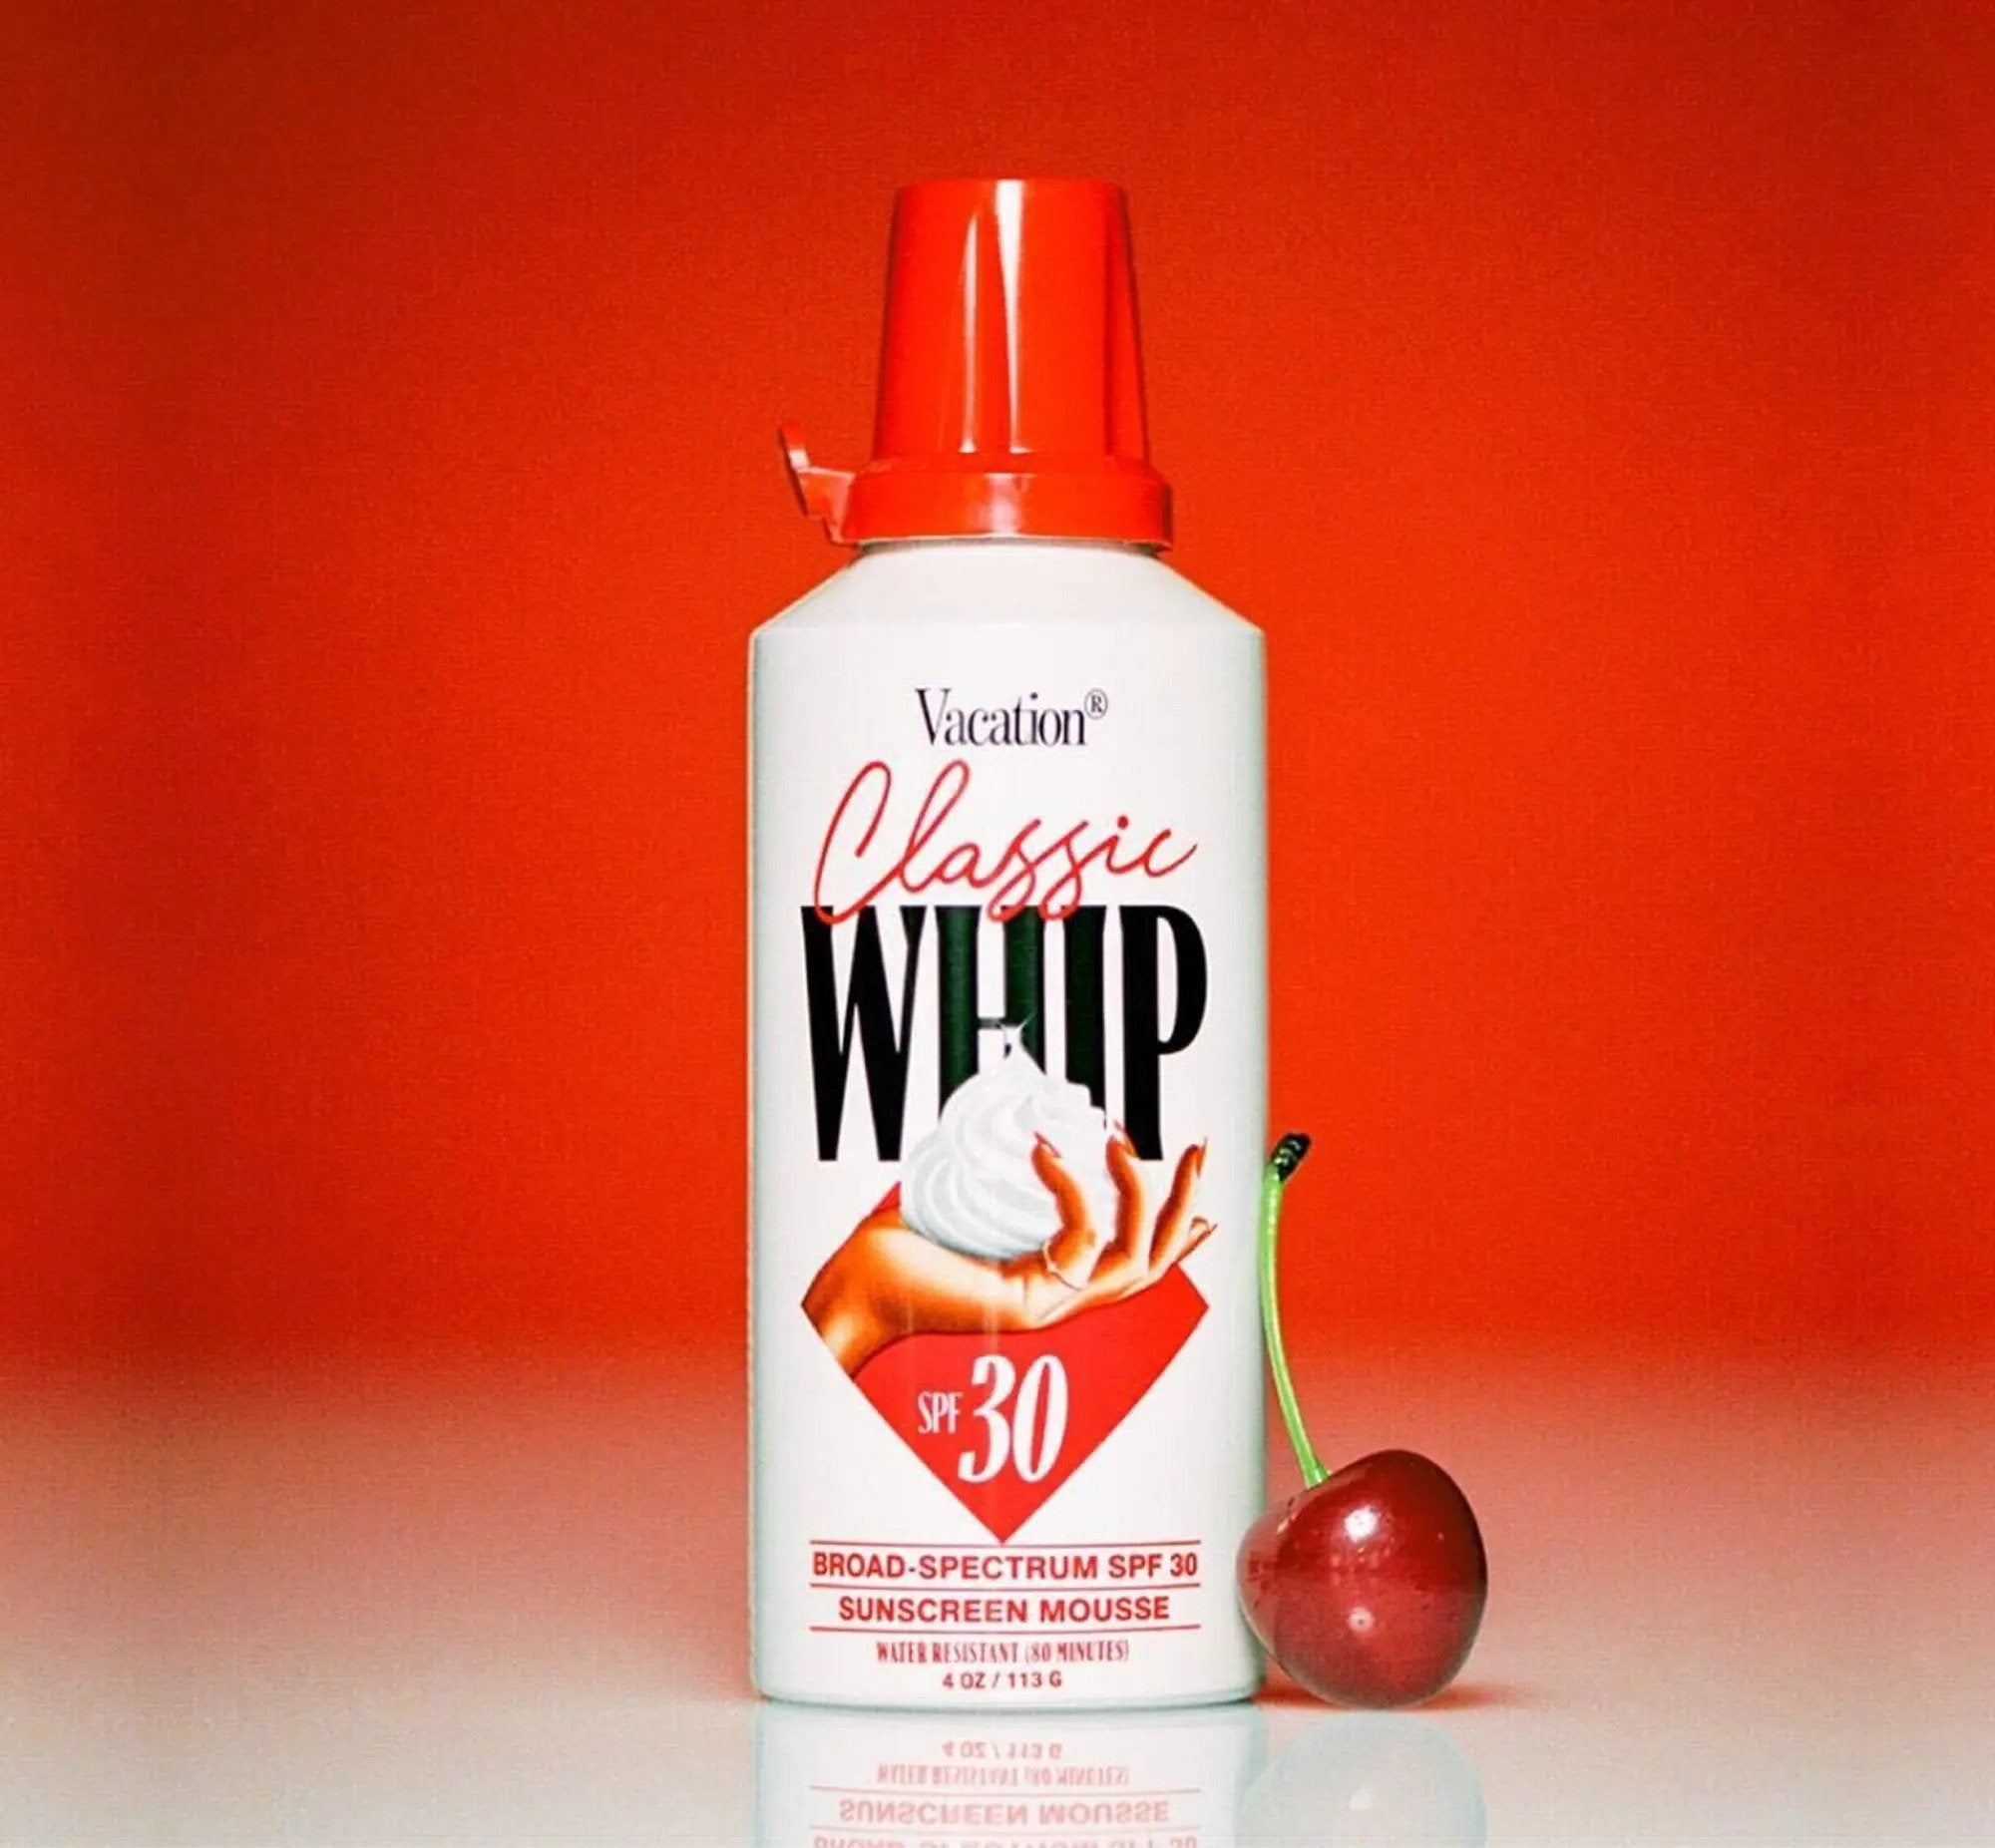 Vacation Classic Whip - SPF 30 Sunscreen Mousse